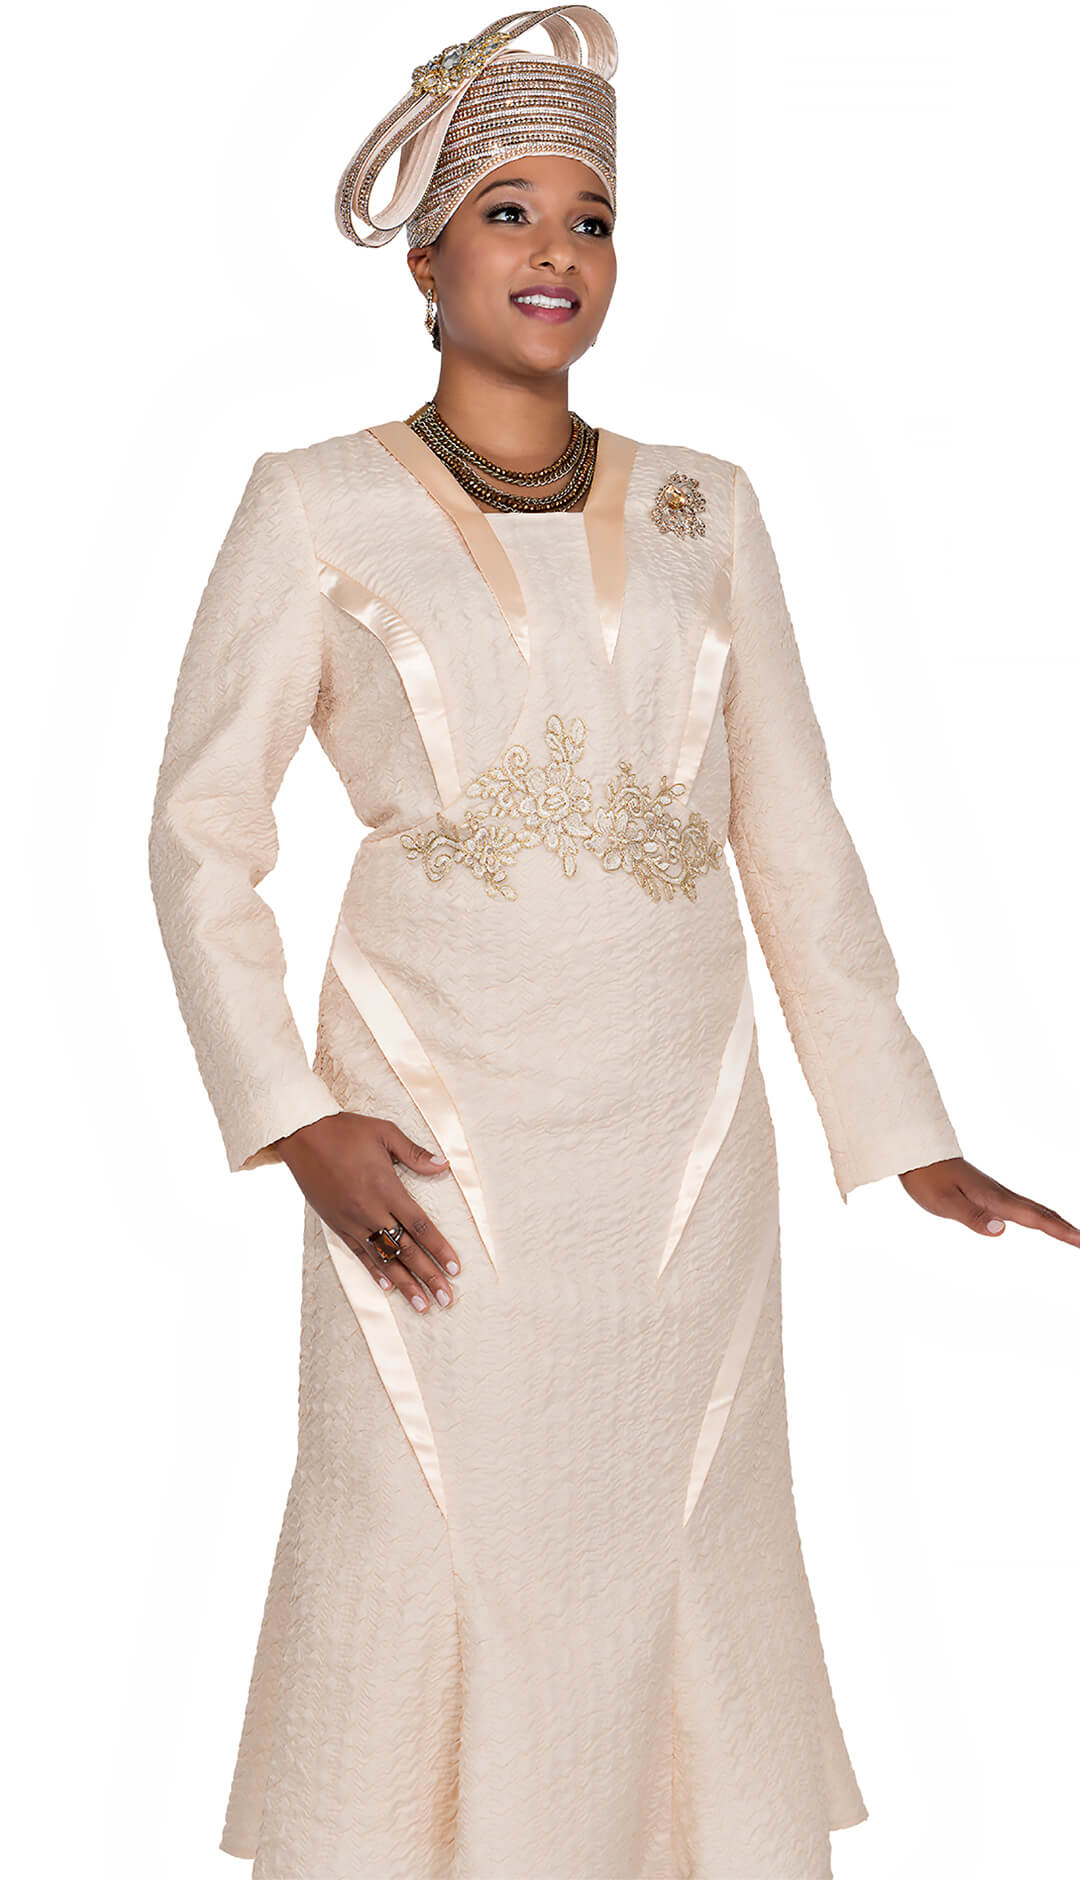 Elite Champagne Church Dress 6066 - Church Suits For Less